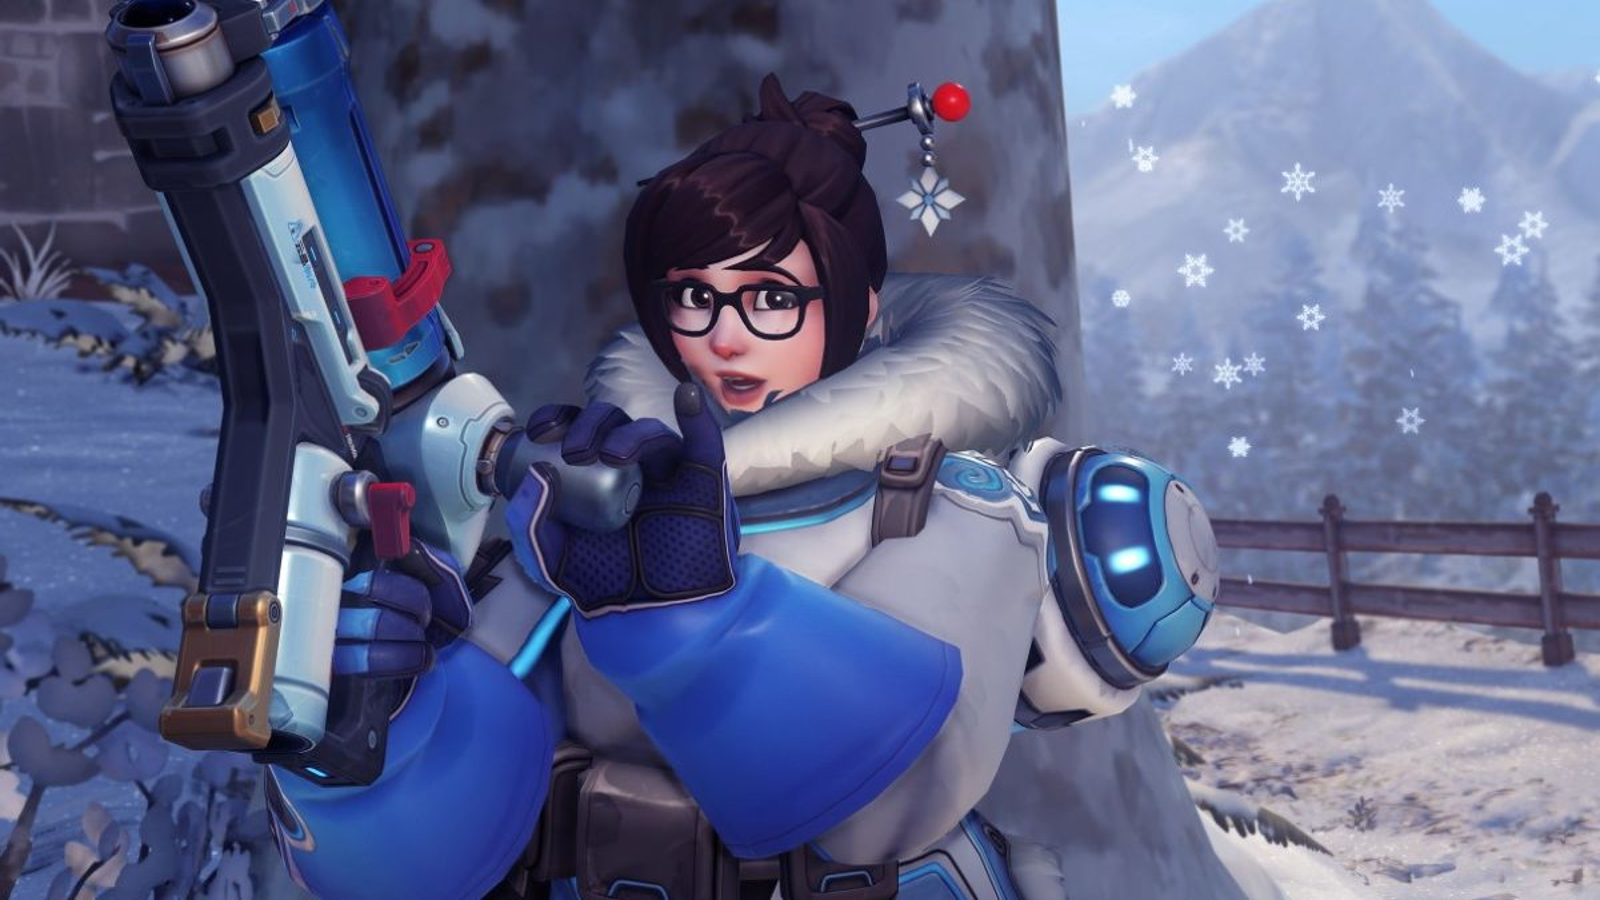 Overwatch 2 Developer Looking to Make Support Role “More Fun,” Season 2  Balance Details Coming Soon